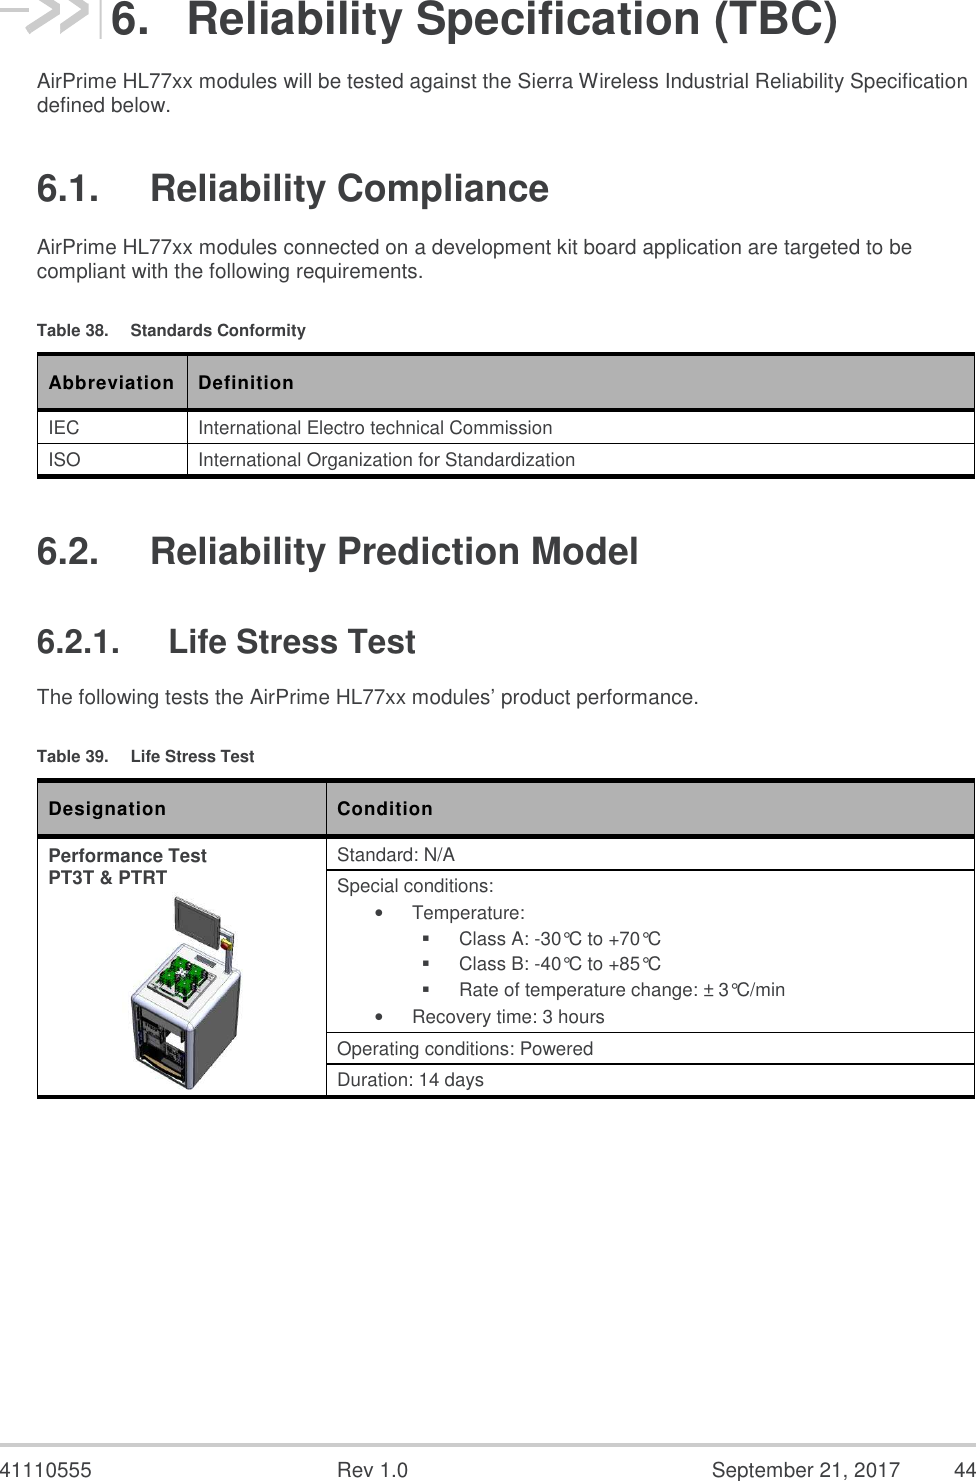  41110555  Rev 1.0  September 21, 2017  44 6.  Reliability Specification (TBC) AirPrime HL77xx modules will be tested against the Sierra Wireless Industrial Reliability Specification defined below. 6.1.  Reliability Compliance AirPrime HL77xx modules connected on a development kit board application are targeted to be compliant with the following requirements. Table 38.  Standards Conformity Abbreviation Definition IEC  International Electro technical Commission  ISO   International Organization for Standardization 6.2.  Reliability Prediction Model 6.2.1.  Life Stress Test The following tests the AirPrime HL77xx modules’ product performance. Table 39.  Life Stress Test Designation  Condition Performance Test PT3T &amp; PTRT  Standard: N/A Special conditions: •  Temperature:   Class A: -30°C to +70°C   Class B: -40°C to +85°C   Rate of temperature change: ± 3°C/min •  Recovery time: 3 hours Operating conditions: Powered Duration: 14 days 